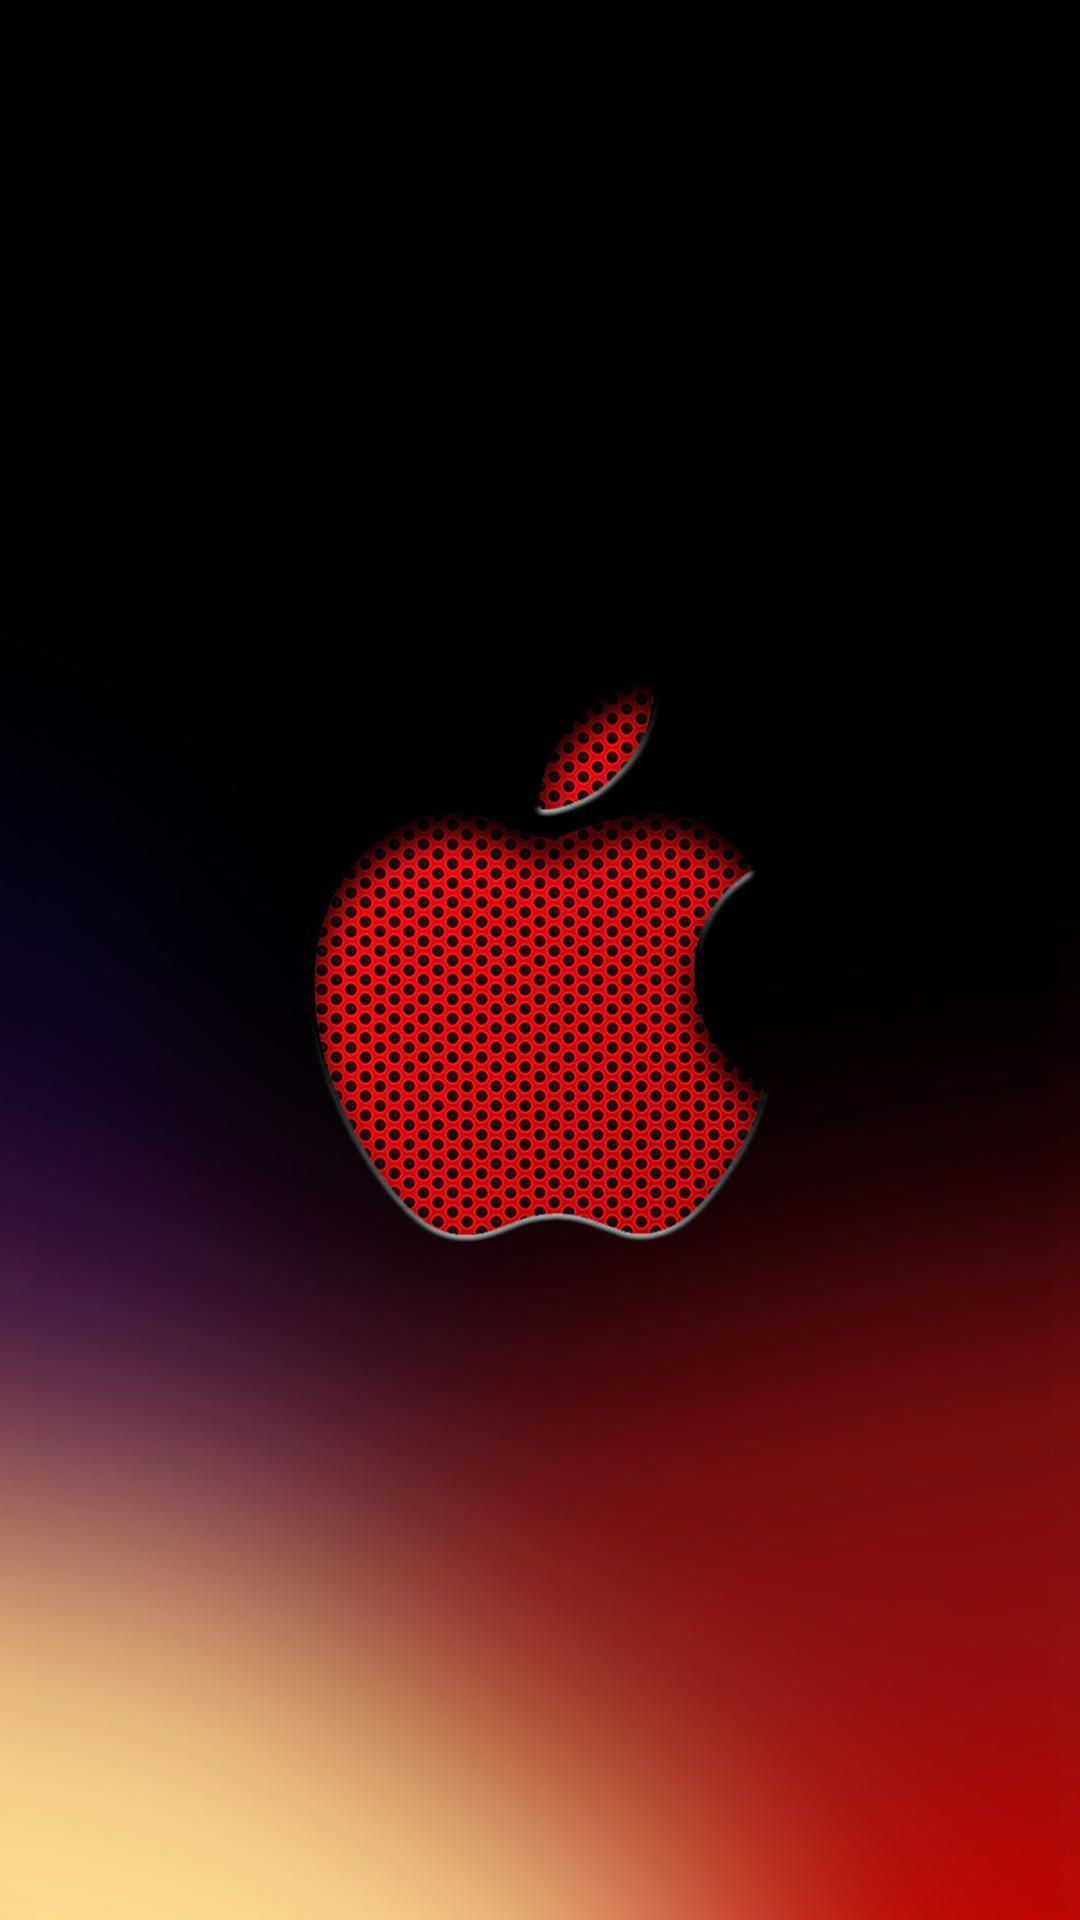 Red Apple iPhone Wallpaper Free Red Apple iPhone